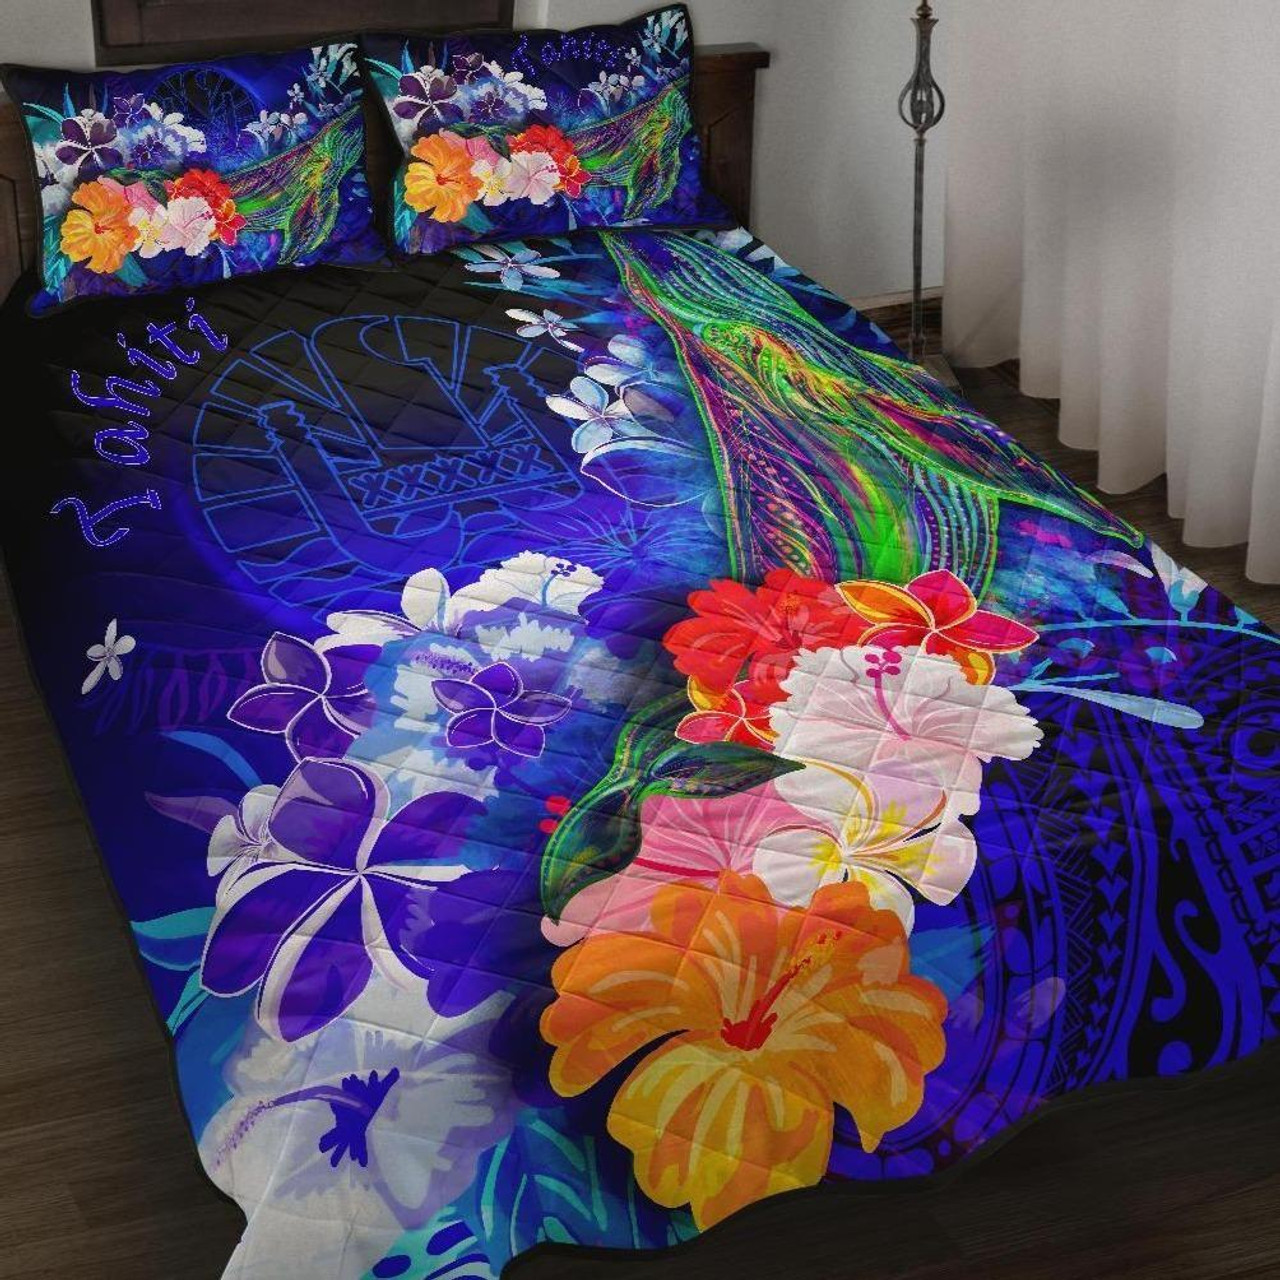 Tahiti Quilt Bed Set - Humpback Whale with Tropical Flowers (Blue) 1